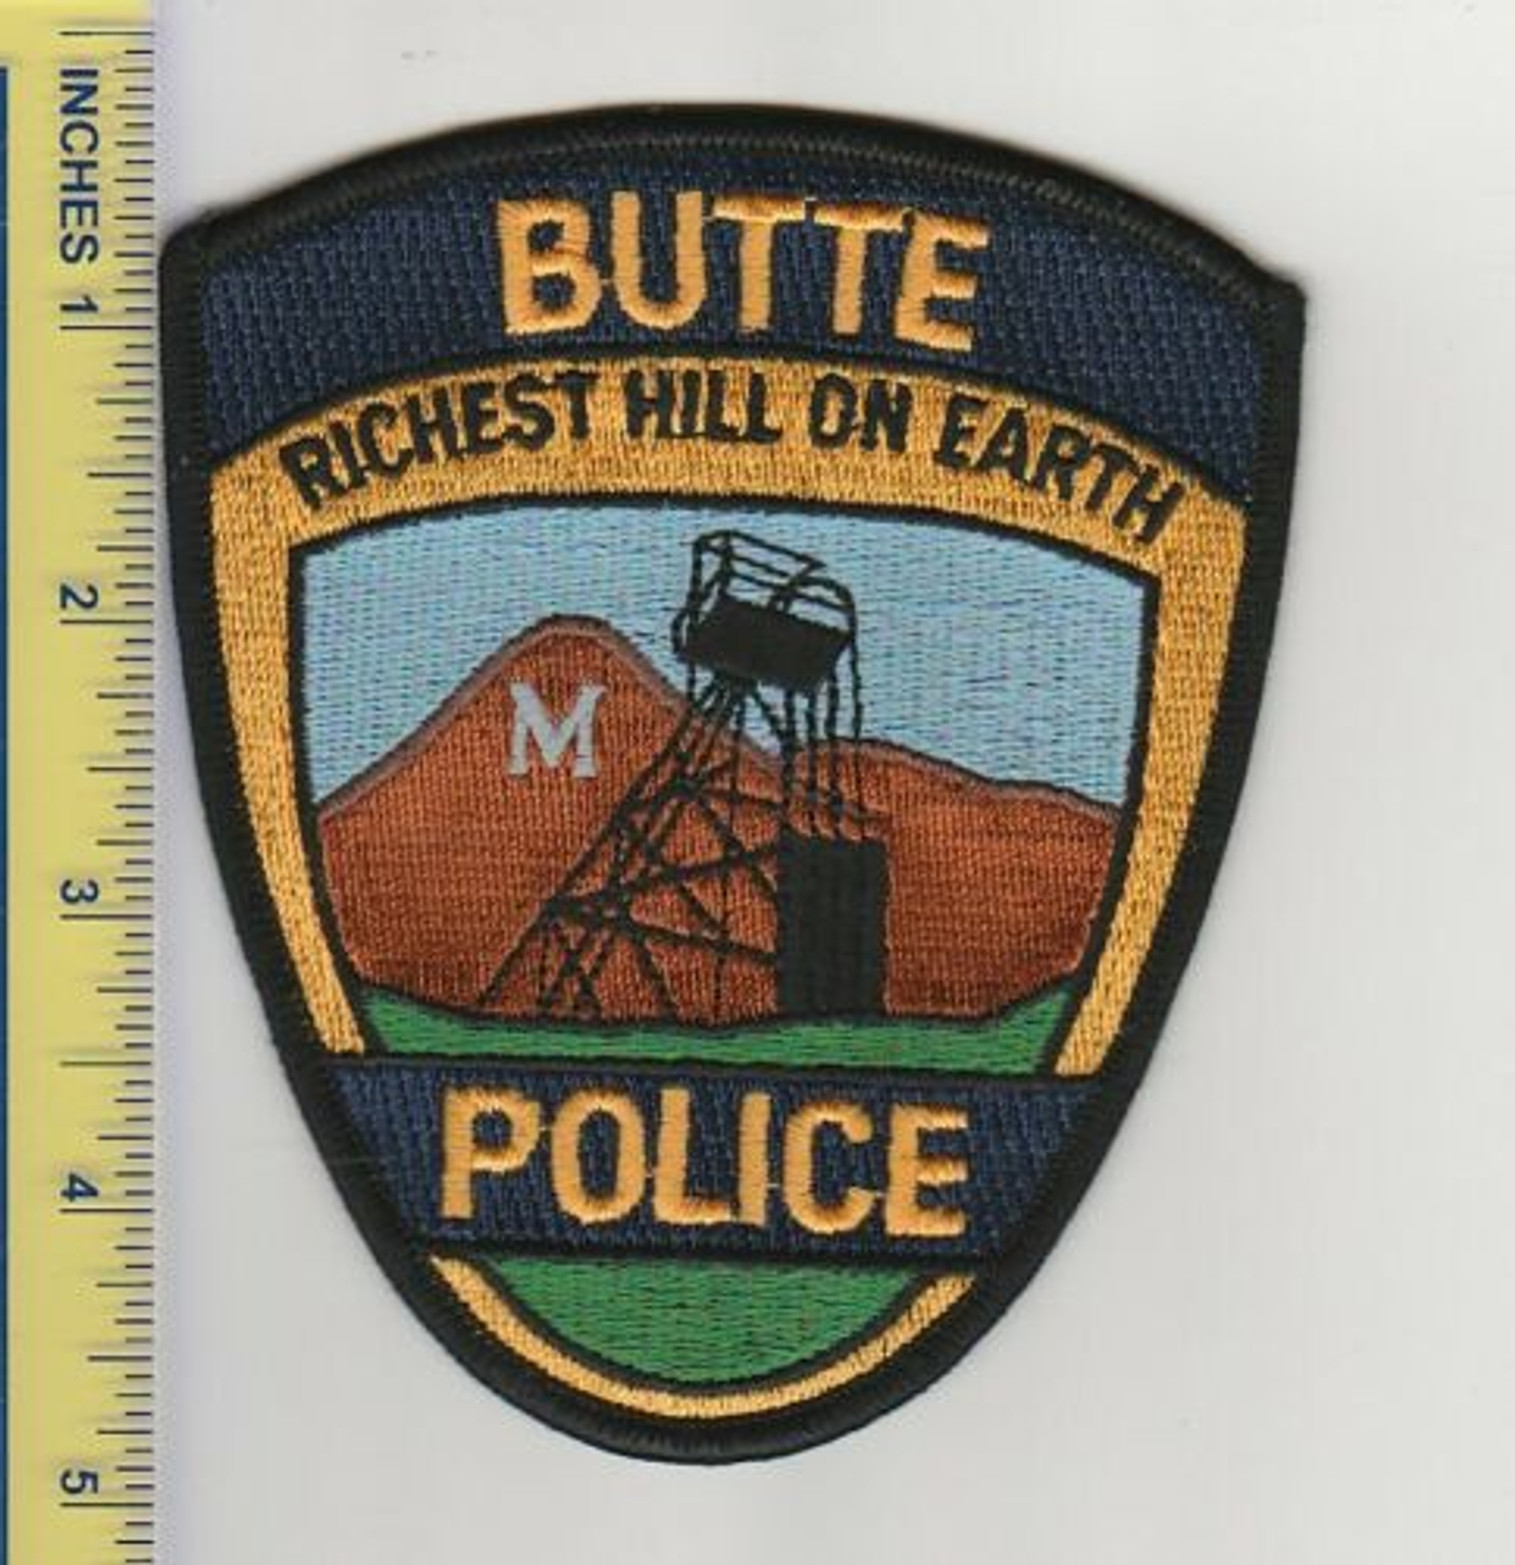 Butte MN Police Patch